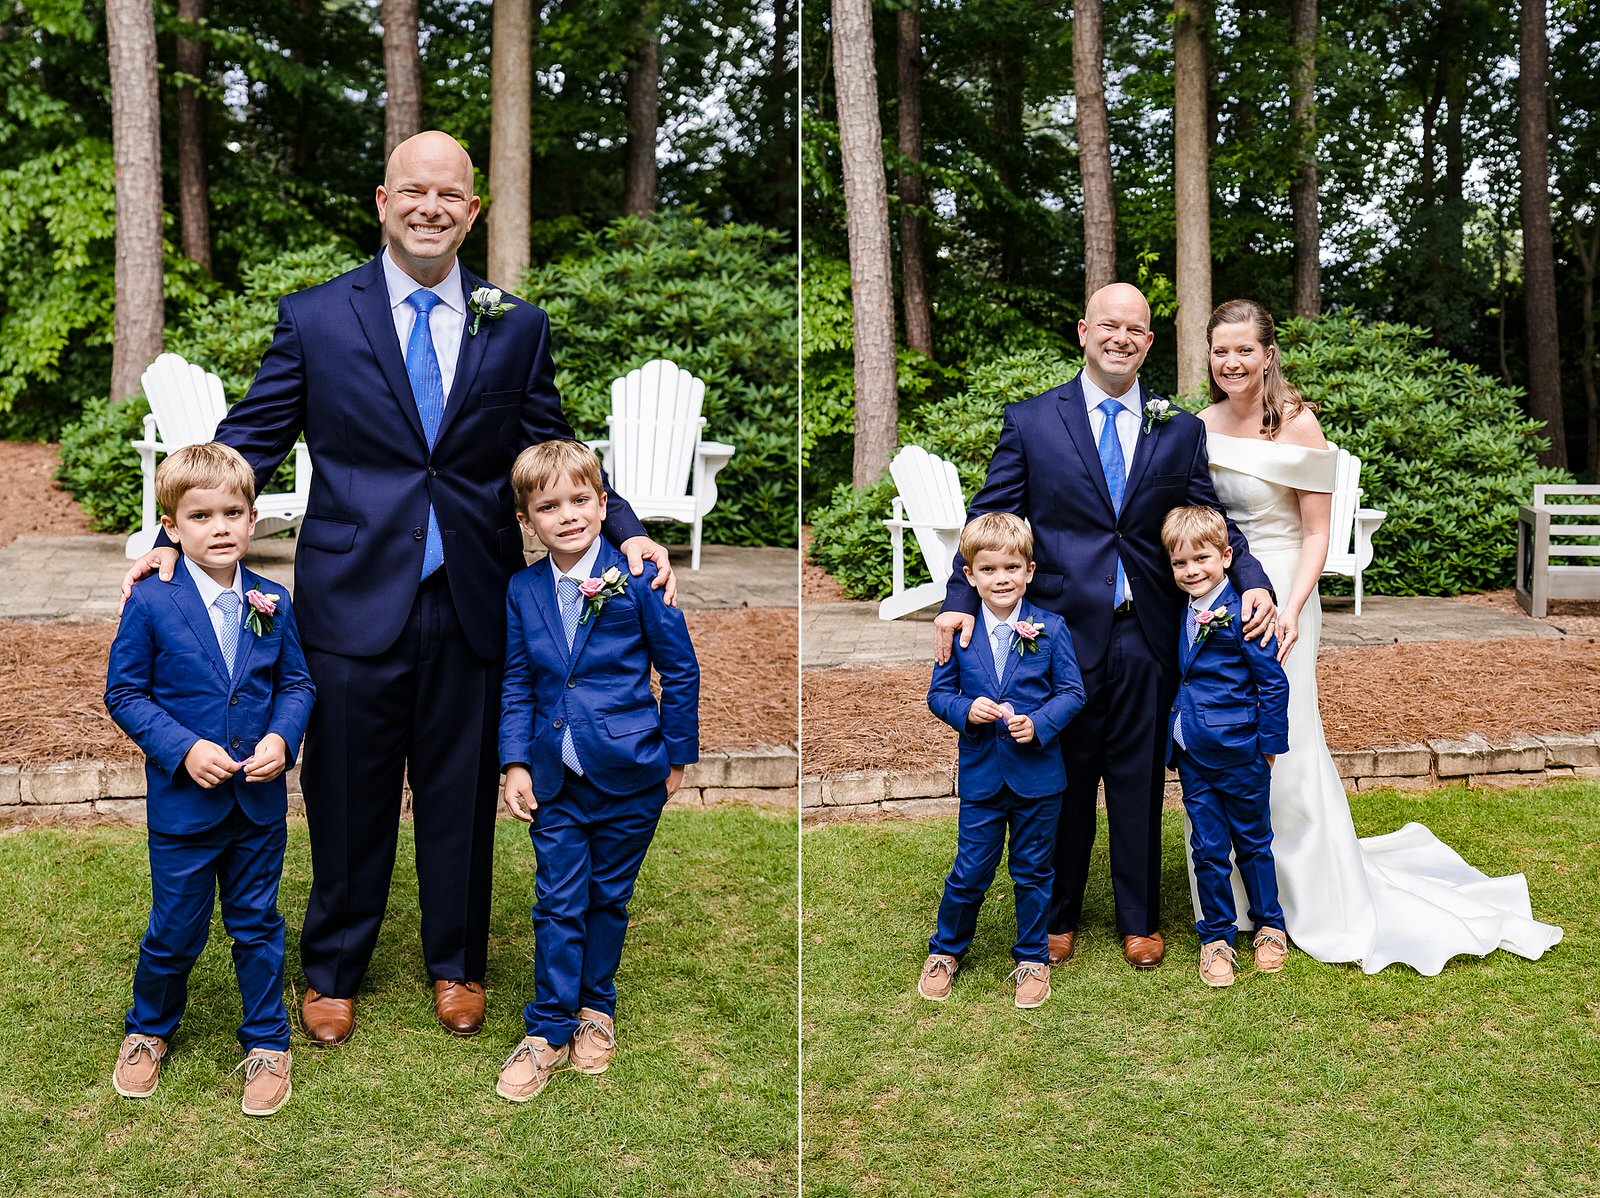 Group photo of bride and groom with groom's twin sons